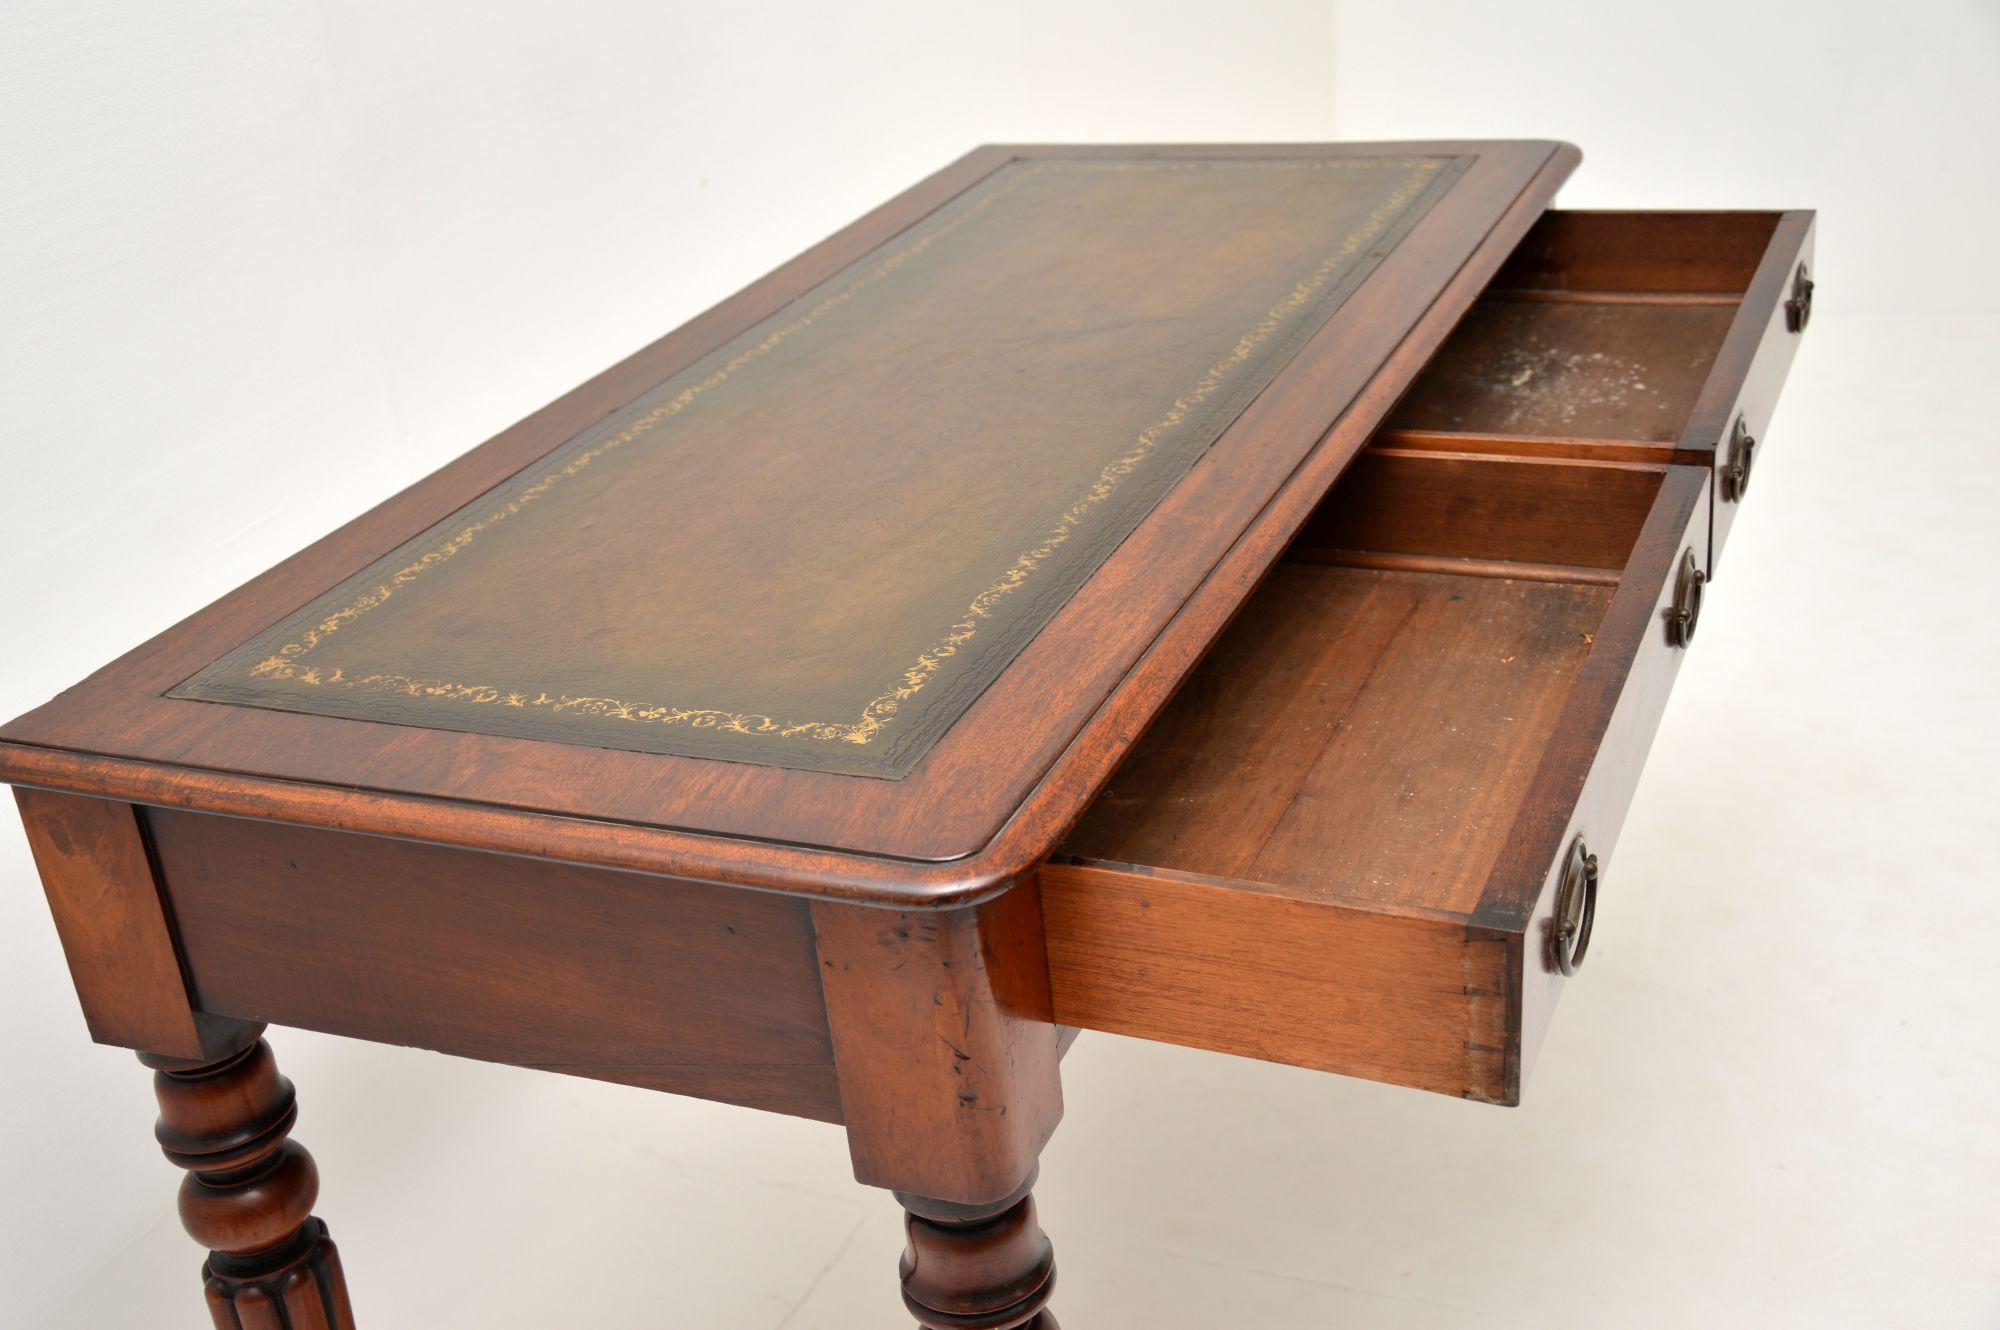 19th Century Antique William IV Mahogany Leather Top Writing Table or Desk